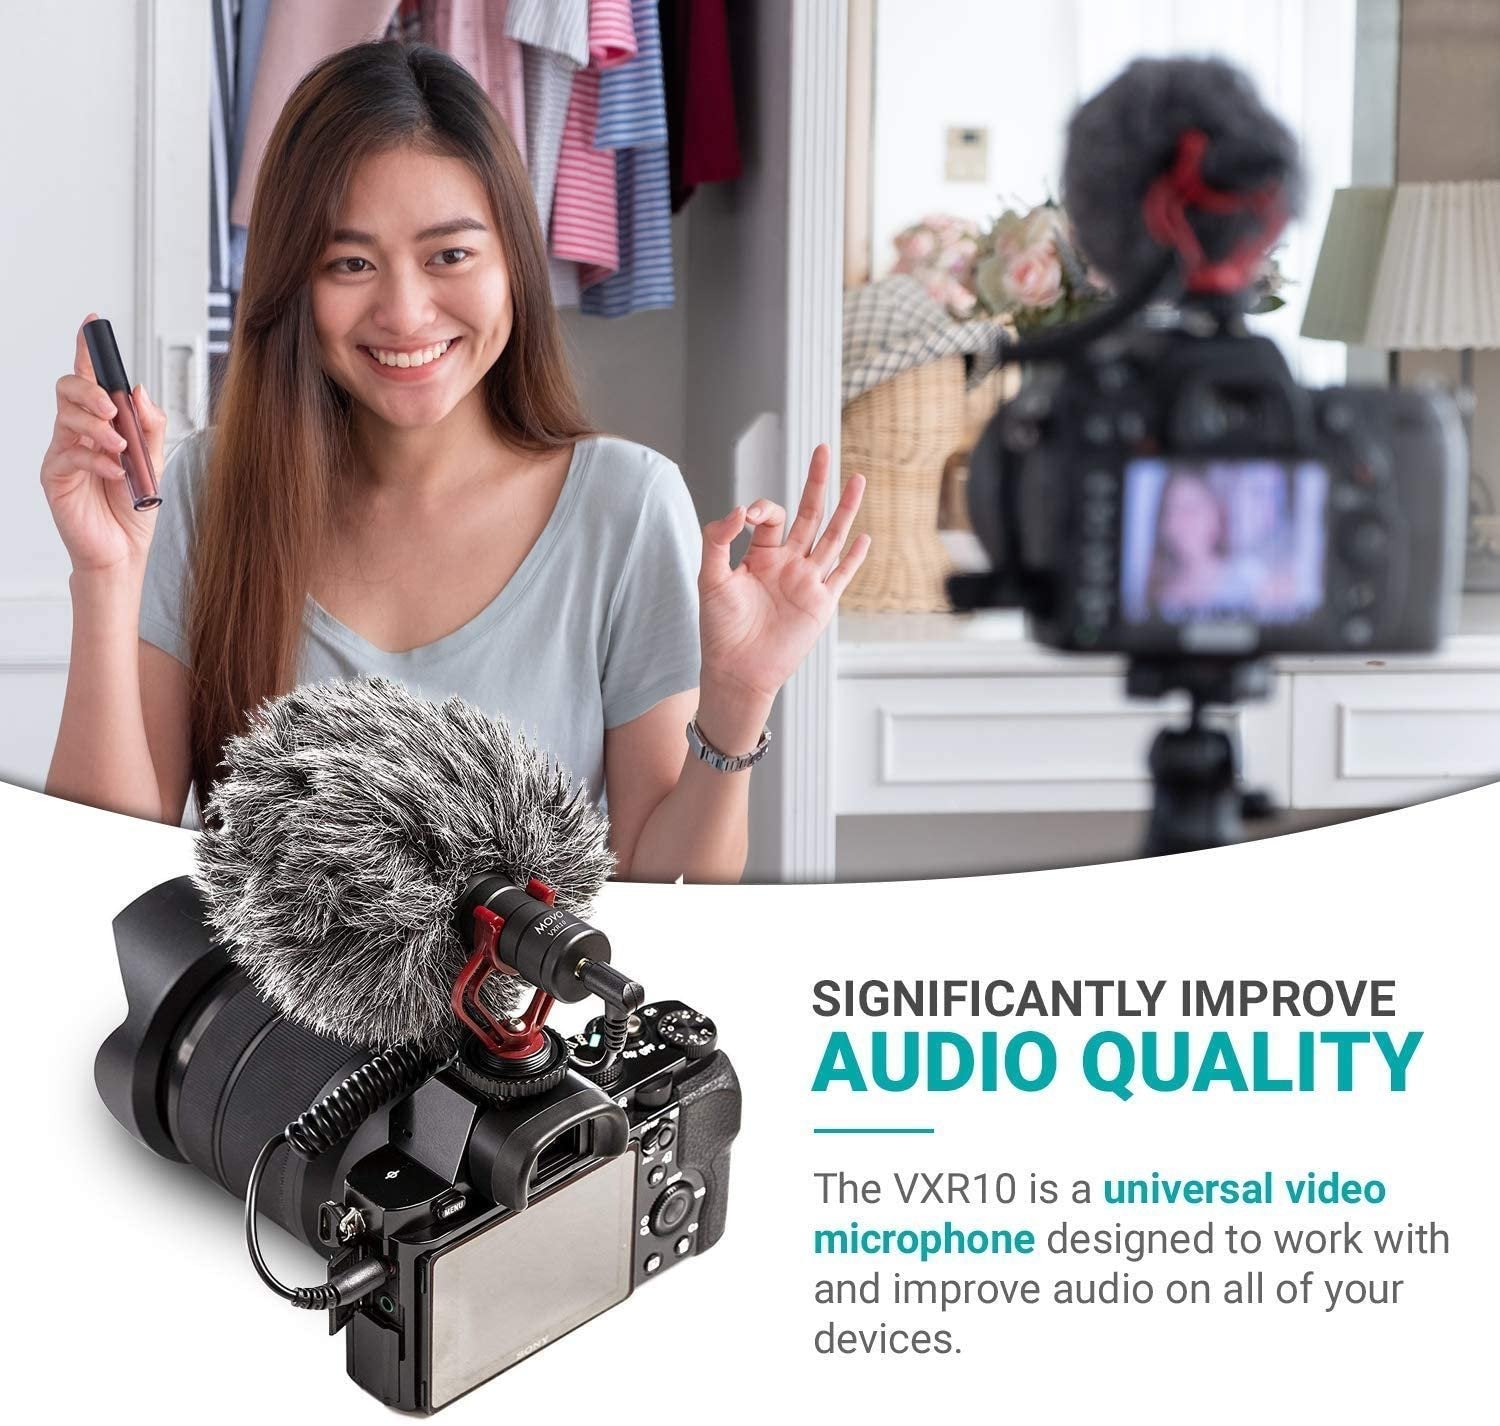 Movo VXR10 Universal Video Microphone Black - Shock Mount & Windscreen - iPhone/Android/DSLR